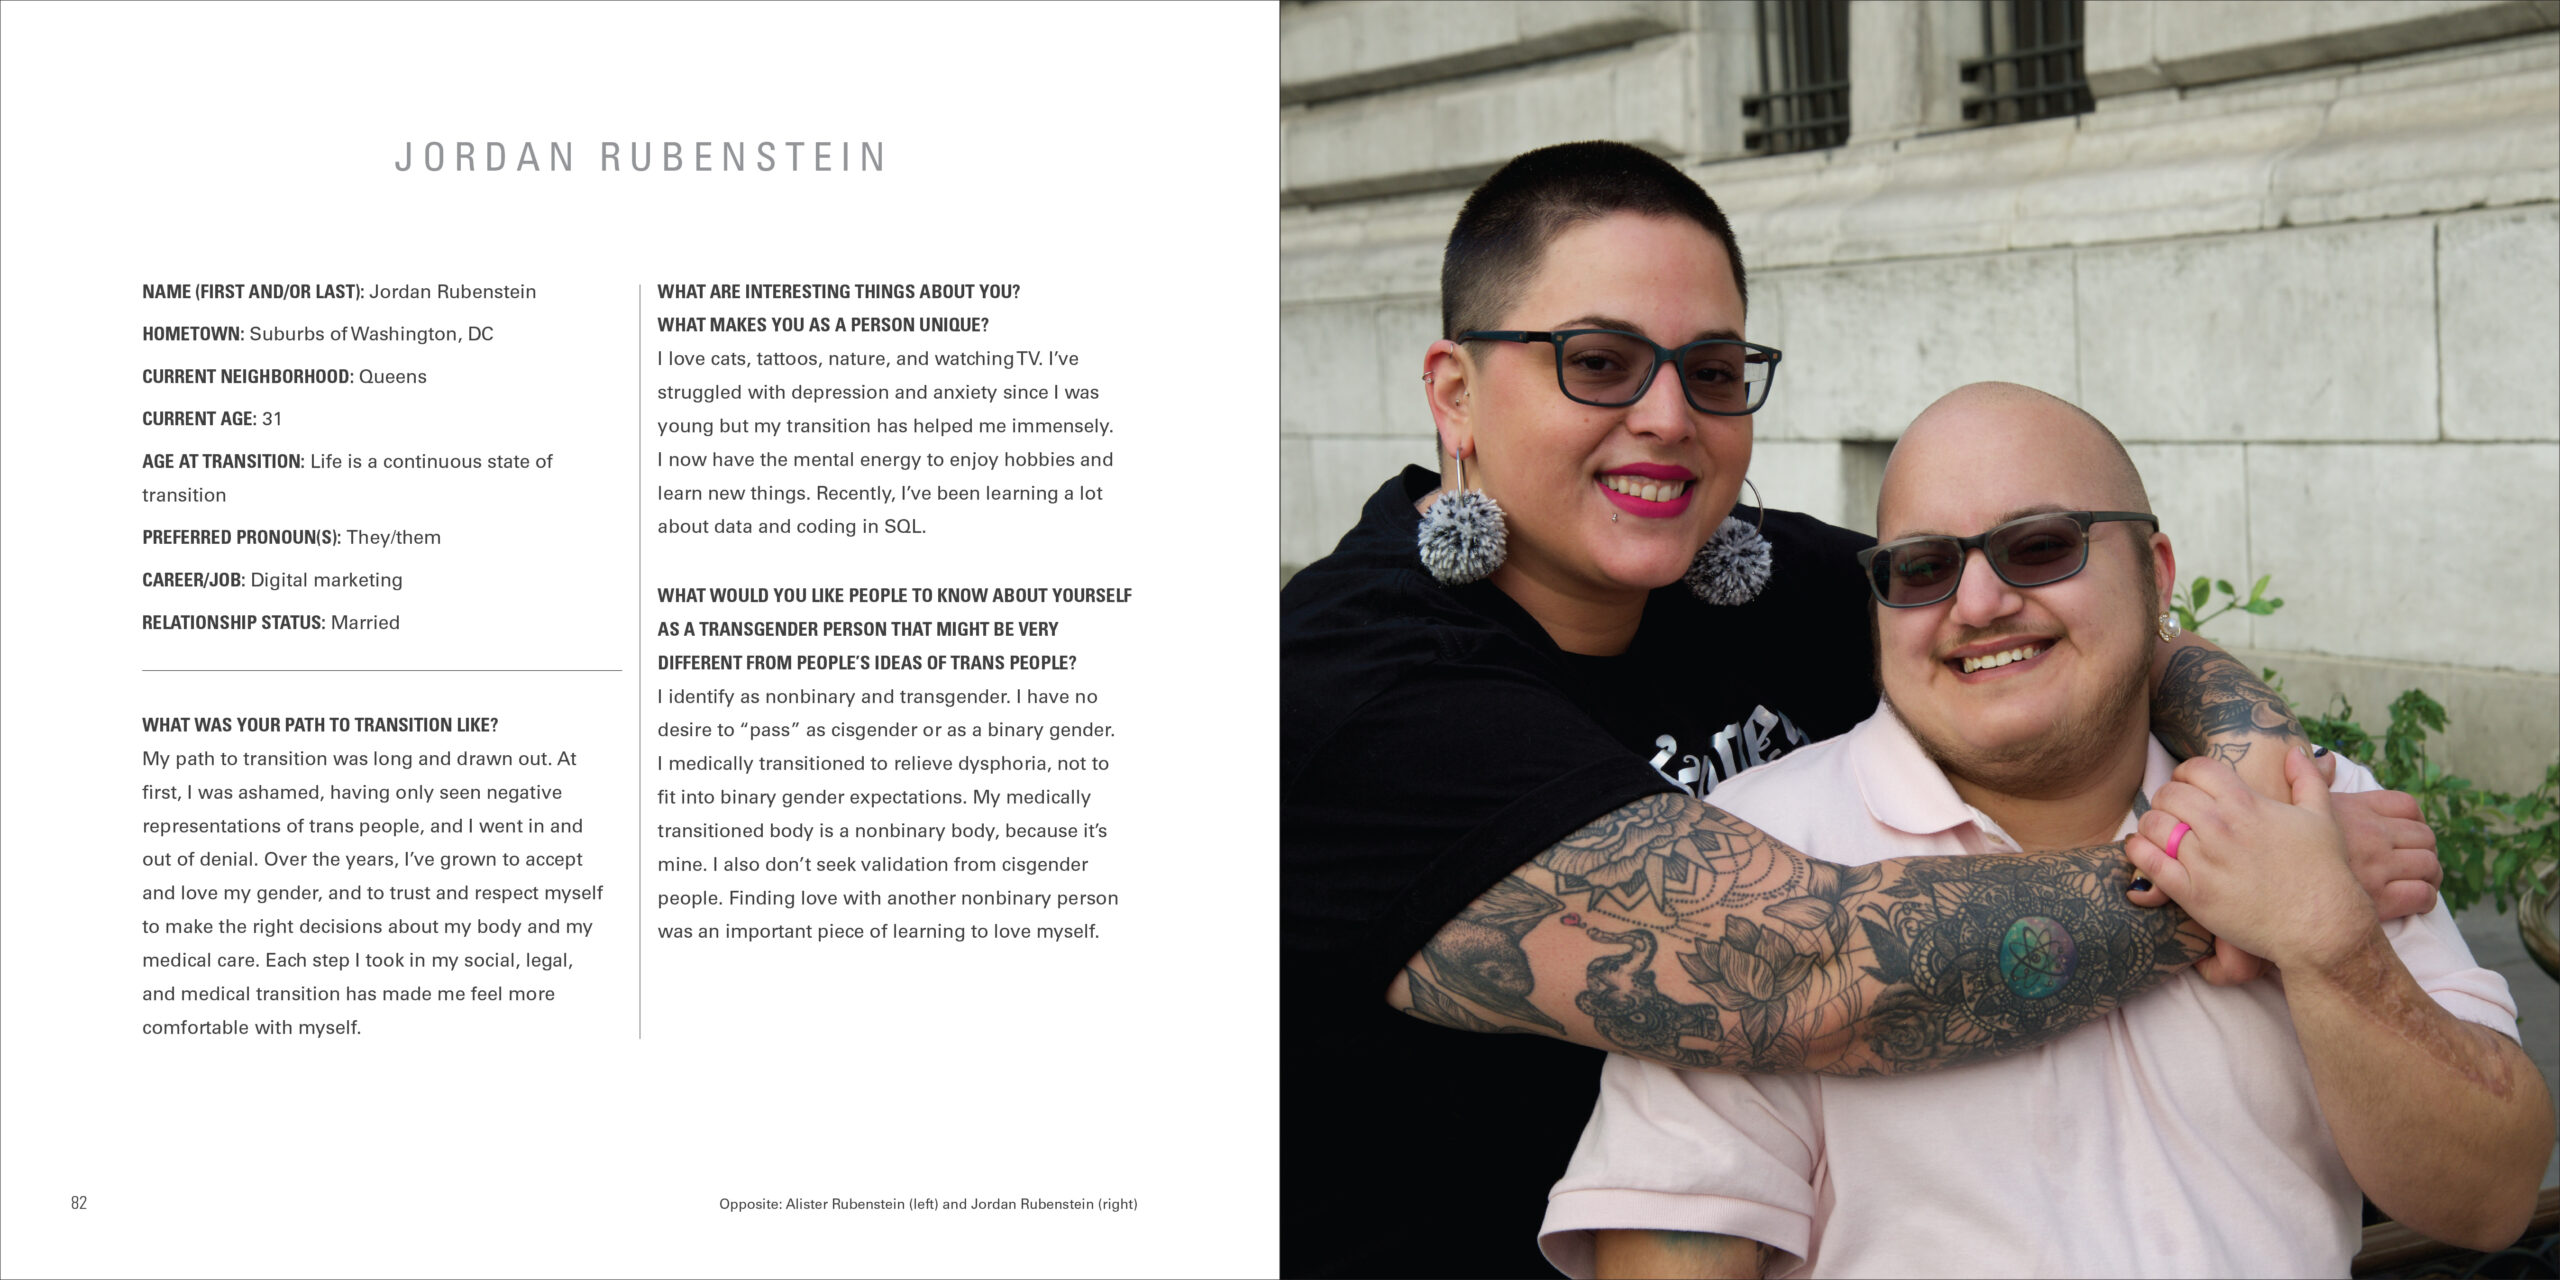 A photograph and interview with Jordan Rubenstein featured in Trans New York by Peter Bussian (Photo Credit: Apollo Publishers)